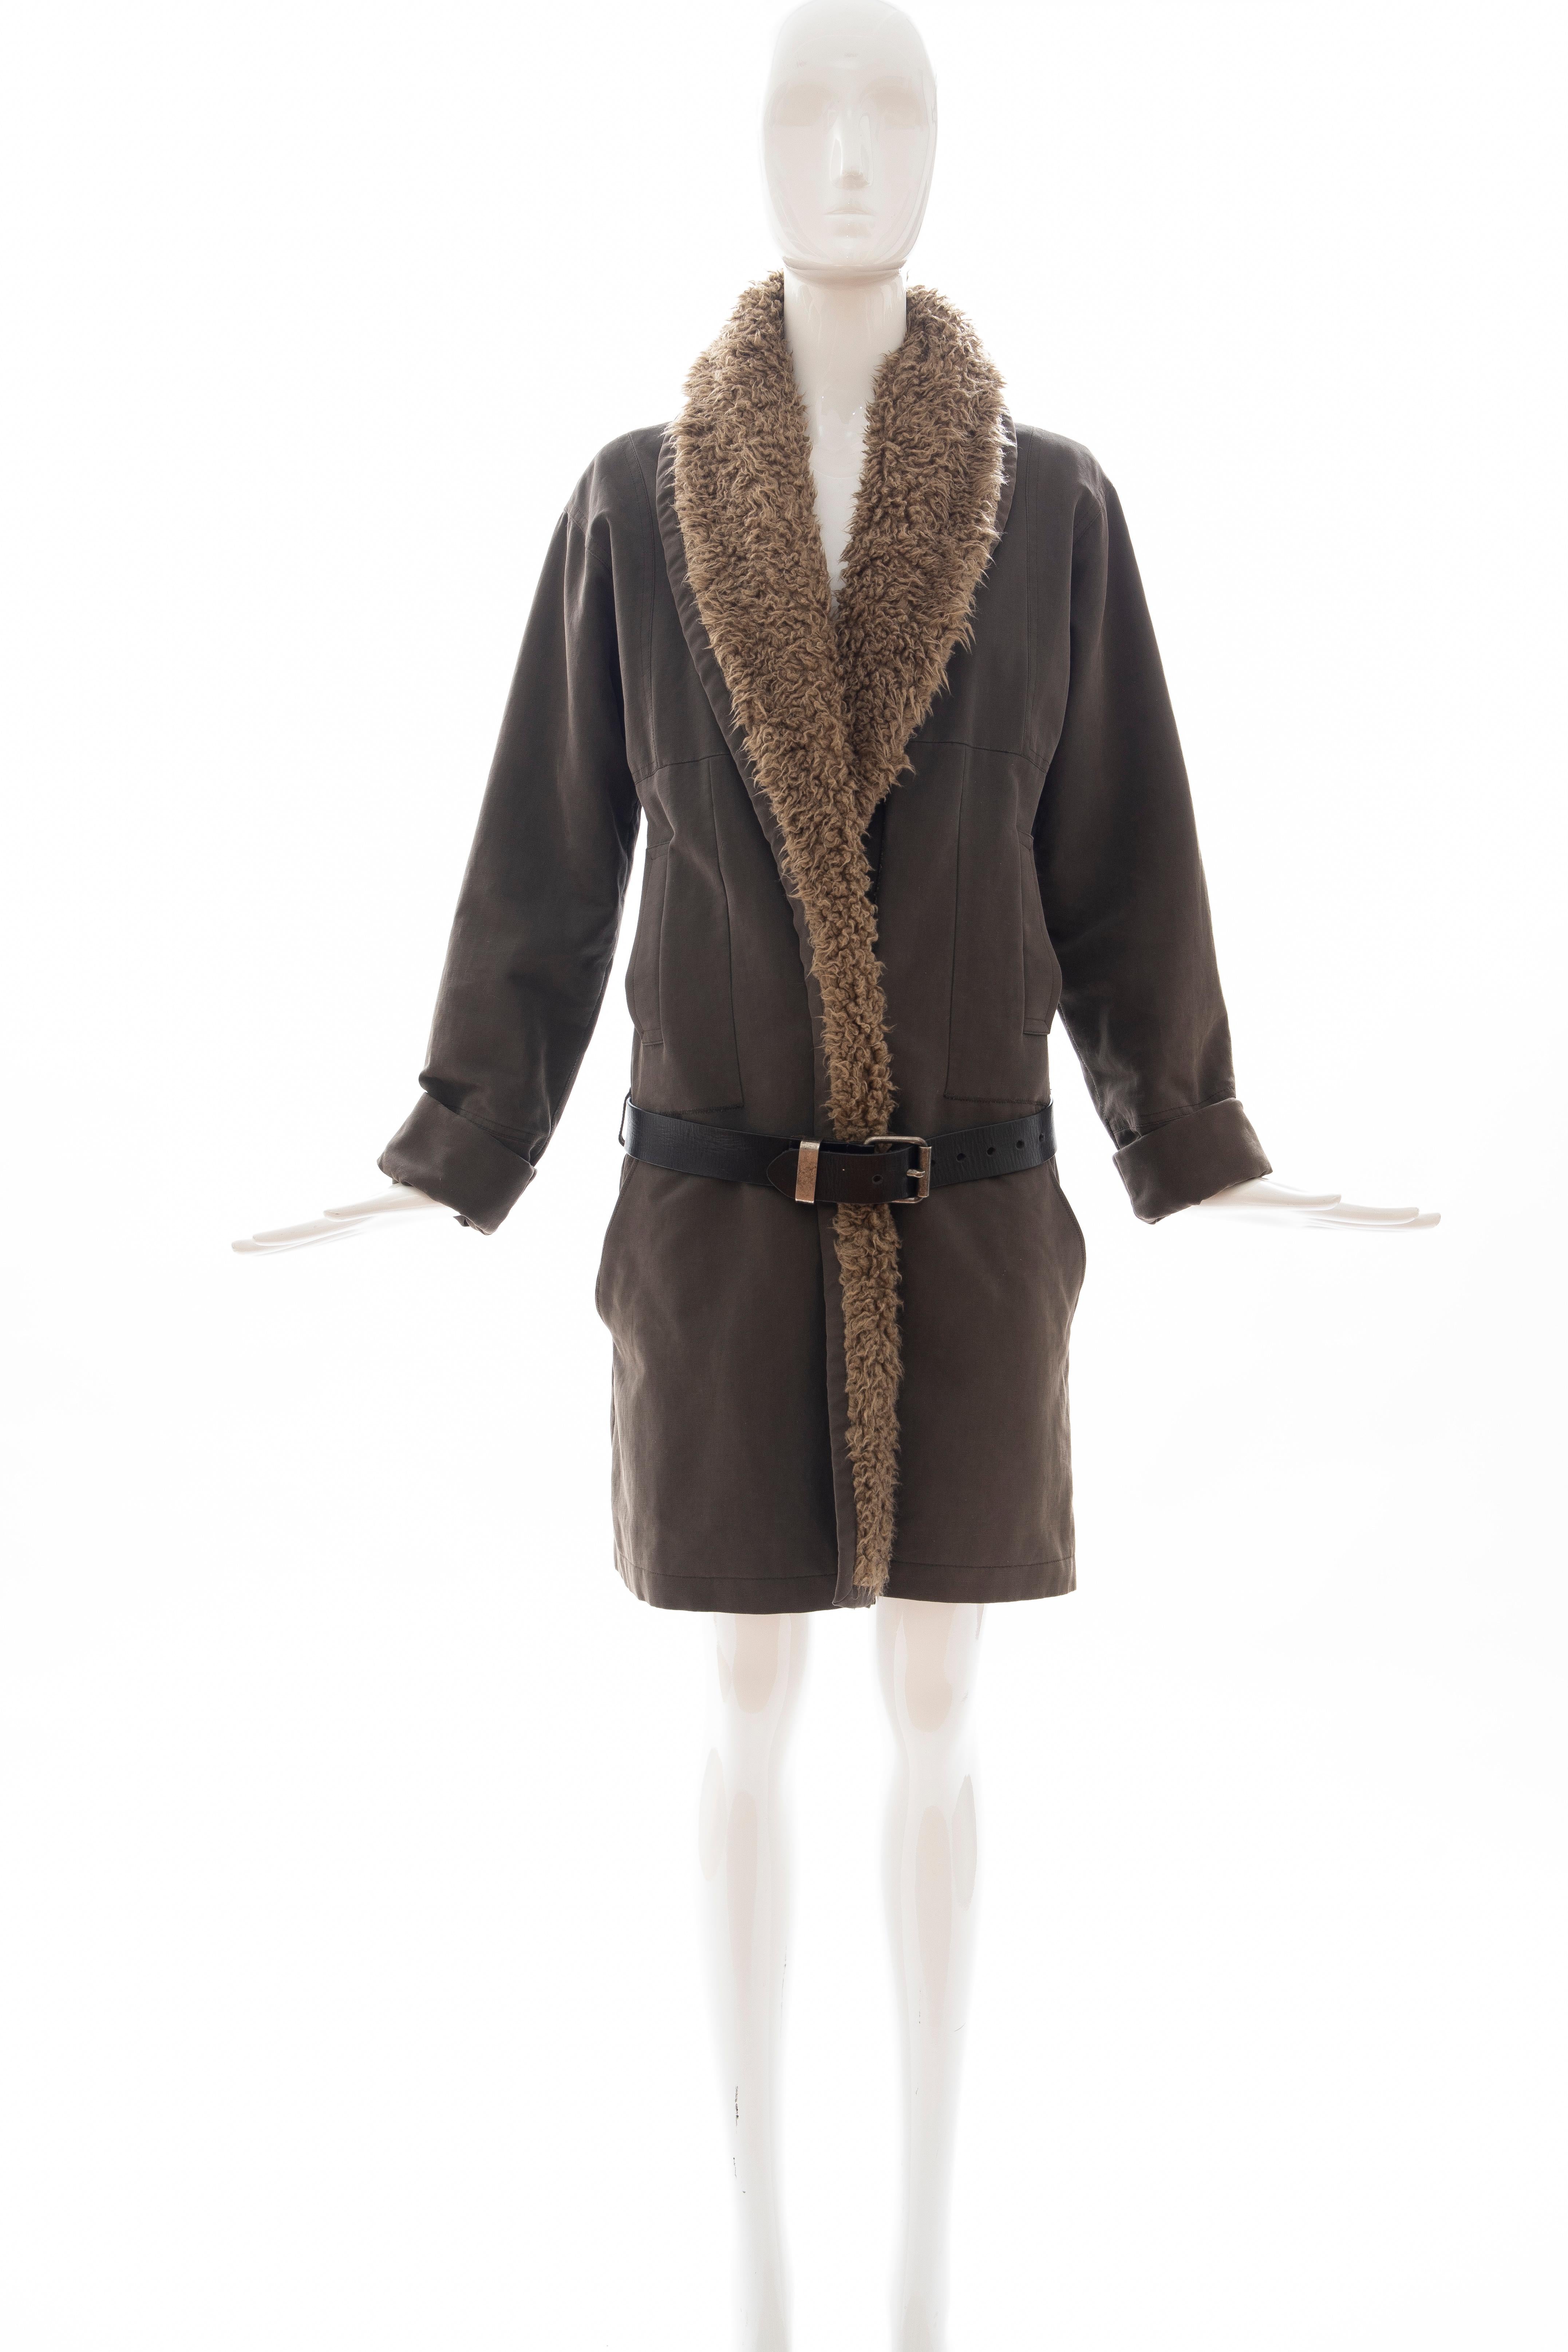 Dries Van Noten, Runway Fall 2002 cotton button front coat featuring shawl lapels, dual pockets, leather belt closure at waist and fully lined.

EU. Small

Bust: 41